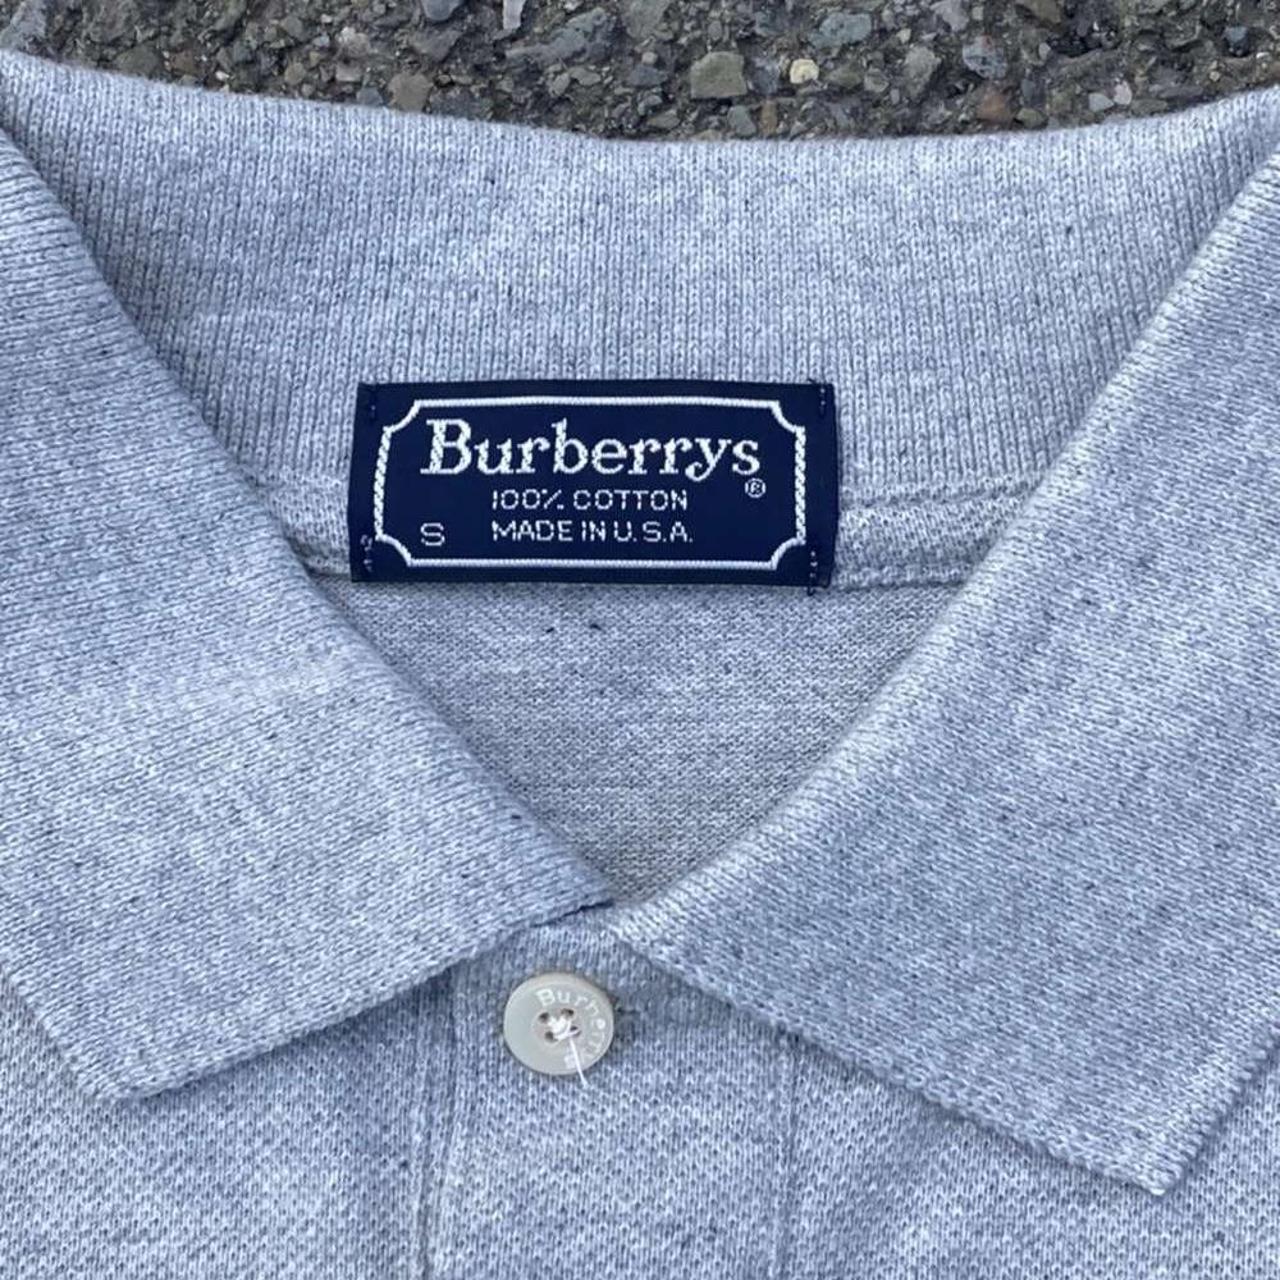 Vintage Burberry polo 90s Size small, fits medium... - Depop